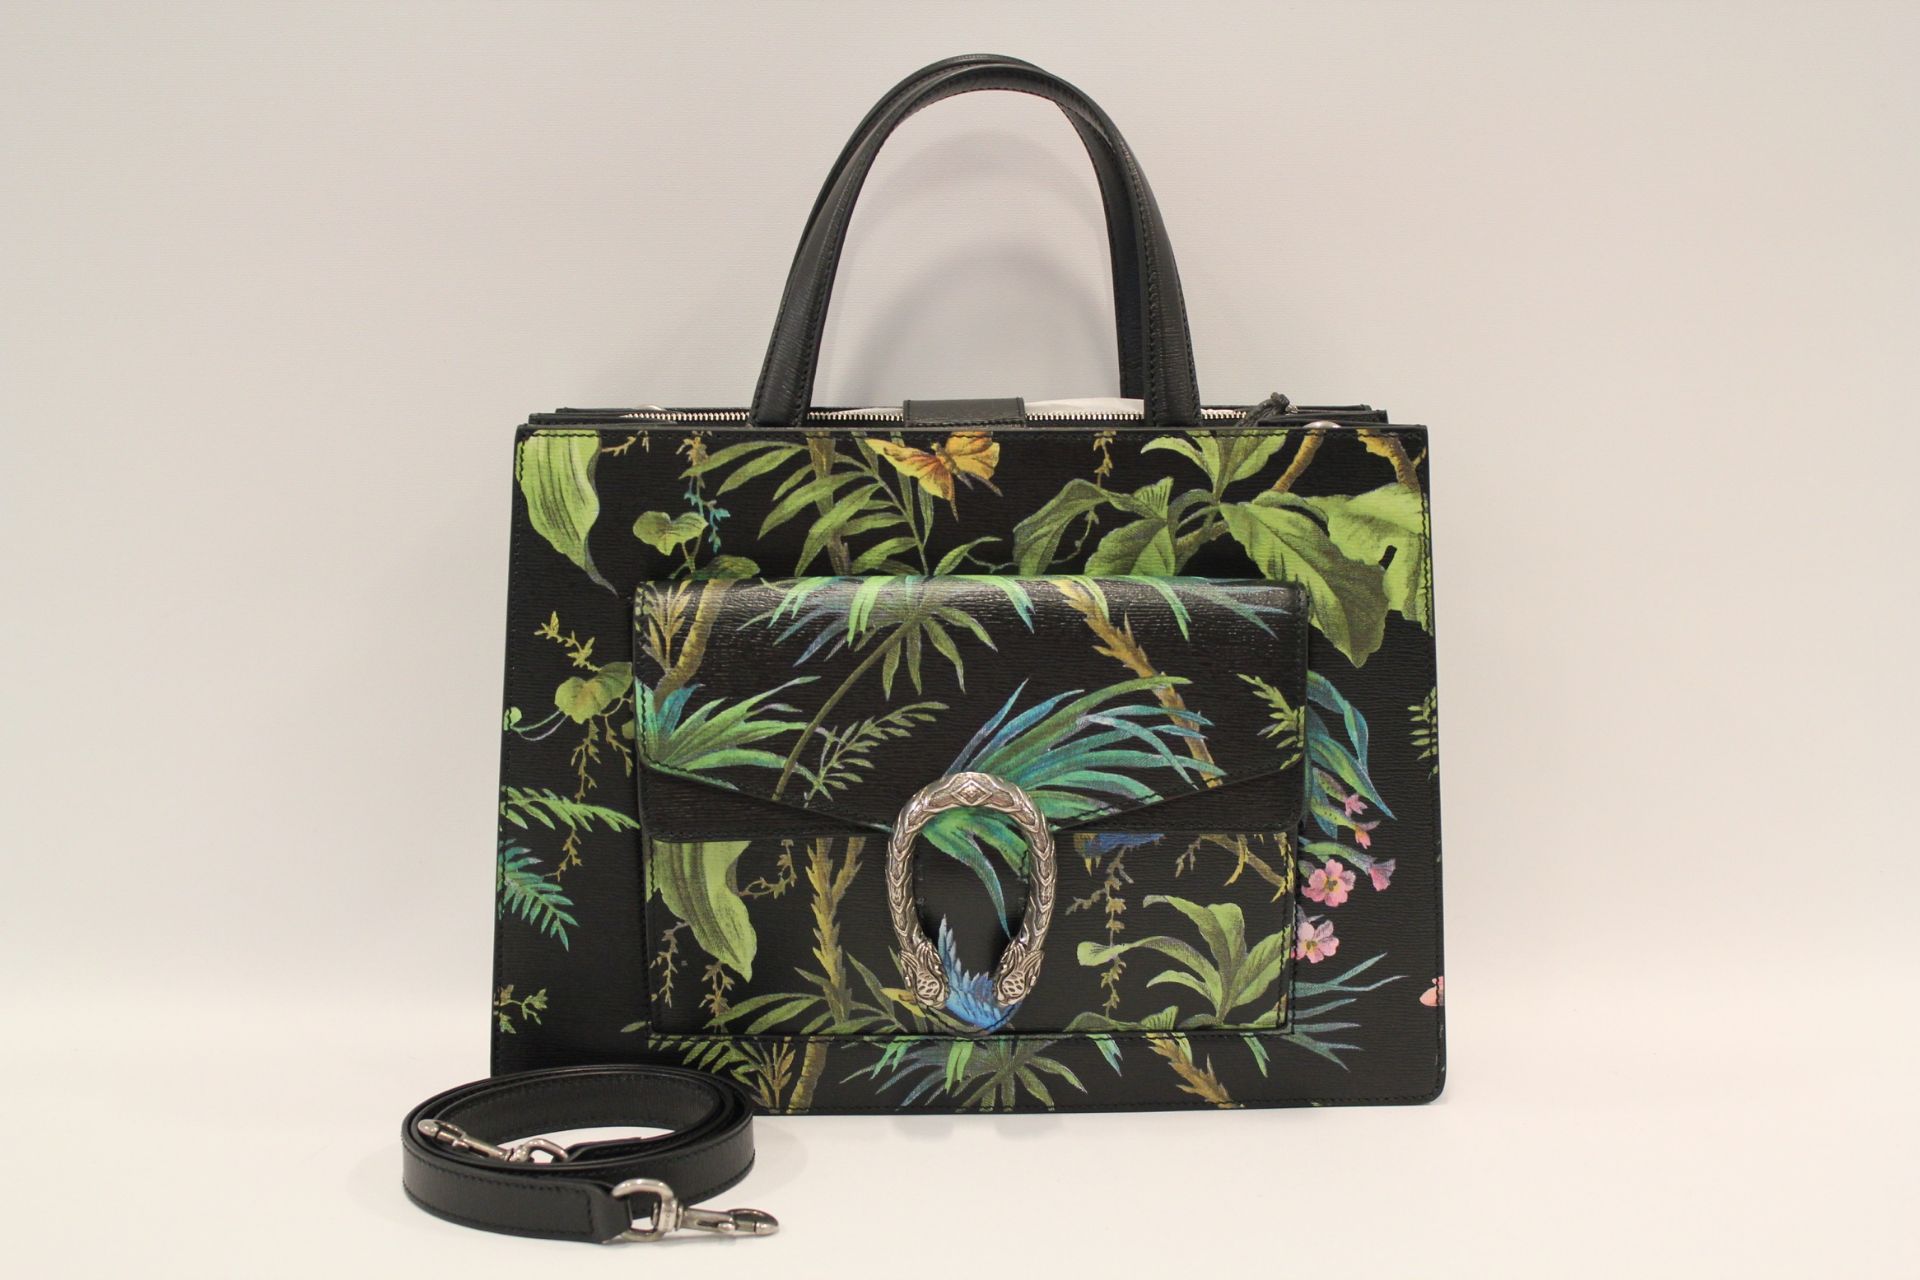 GUCCI Dionysus Tropical Print Top Handle Tote with Front Pocket